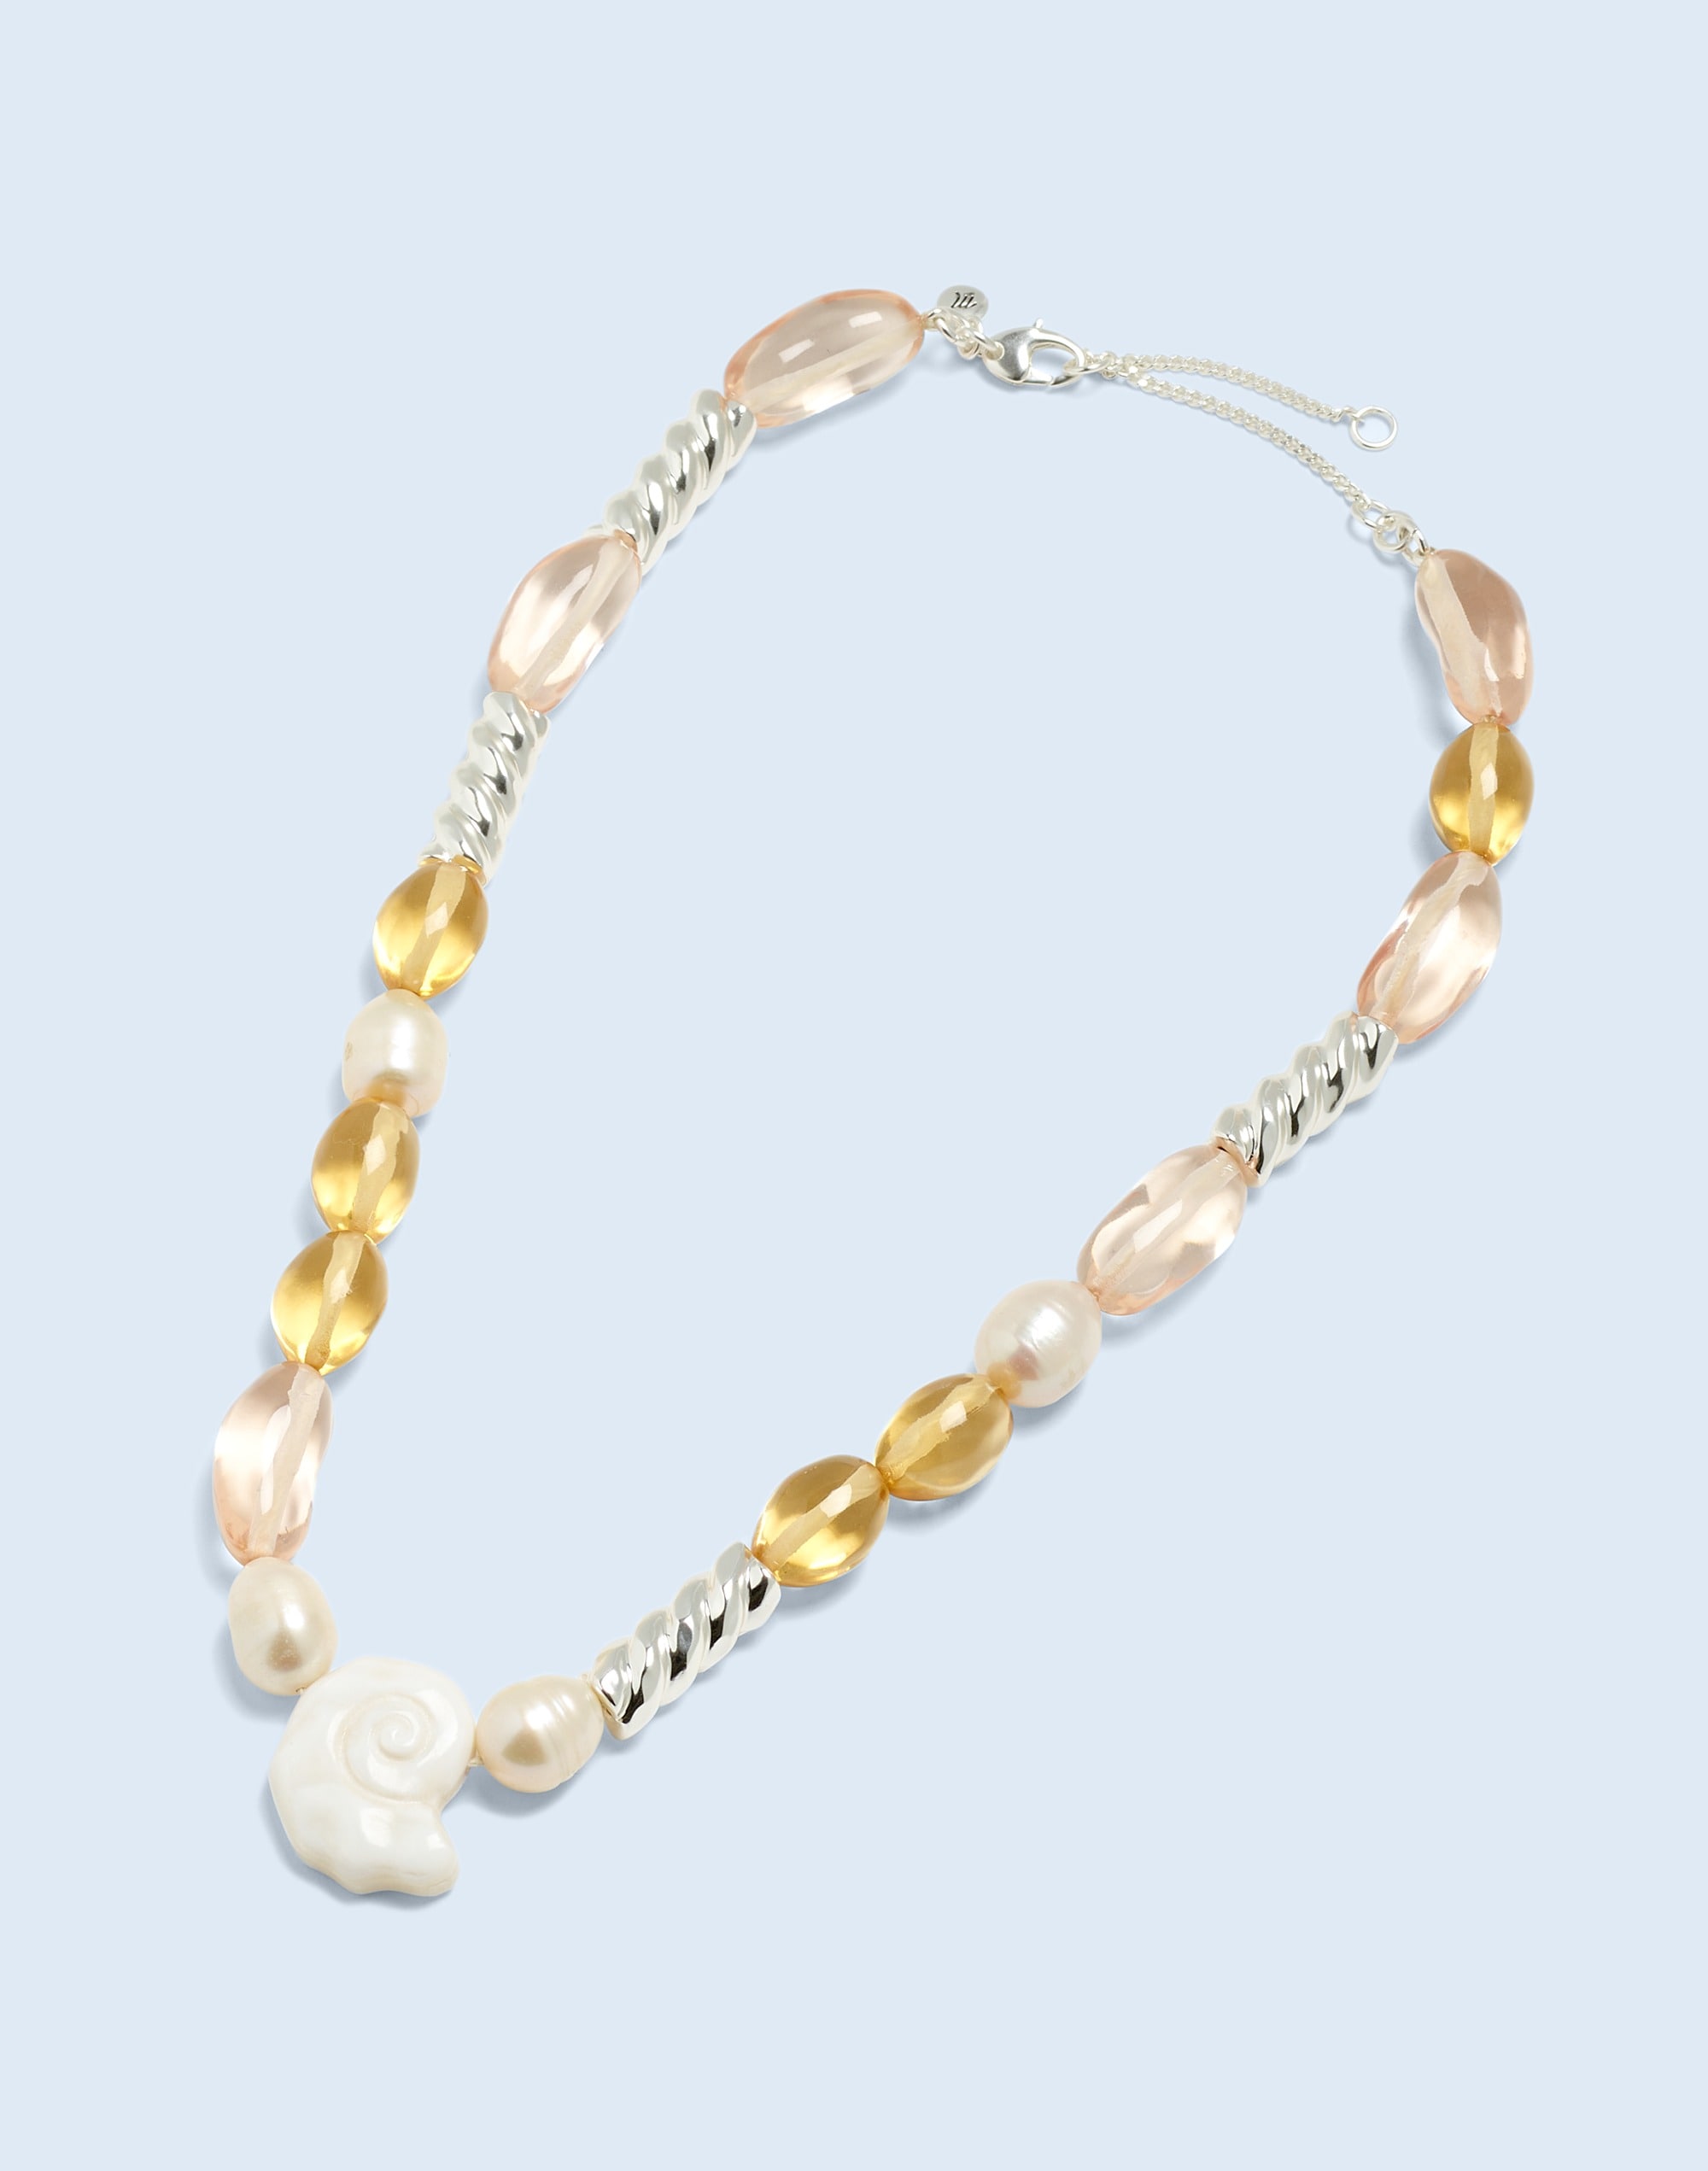 Freshwater Pearl Nautical Beaded Necklace